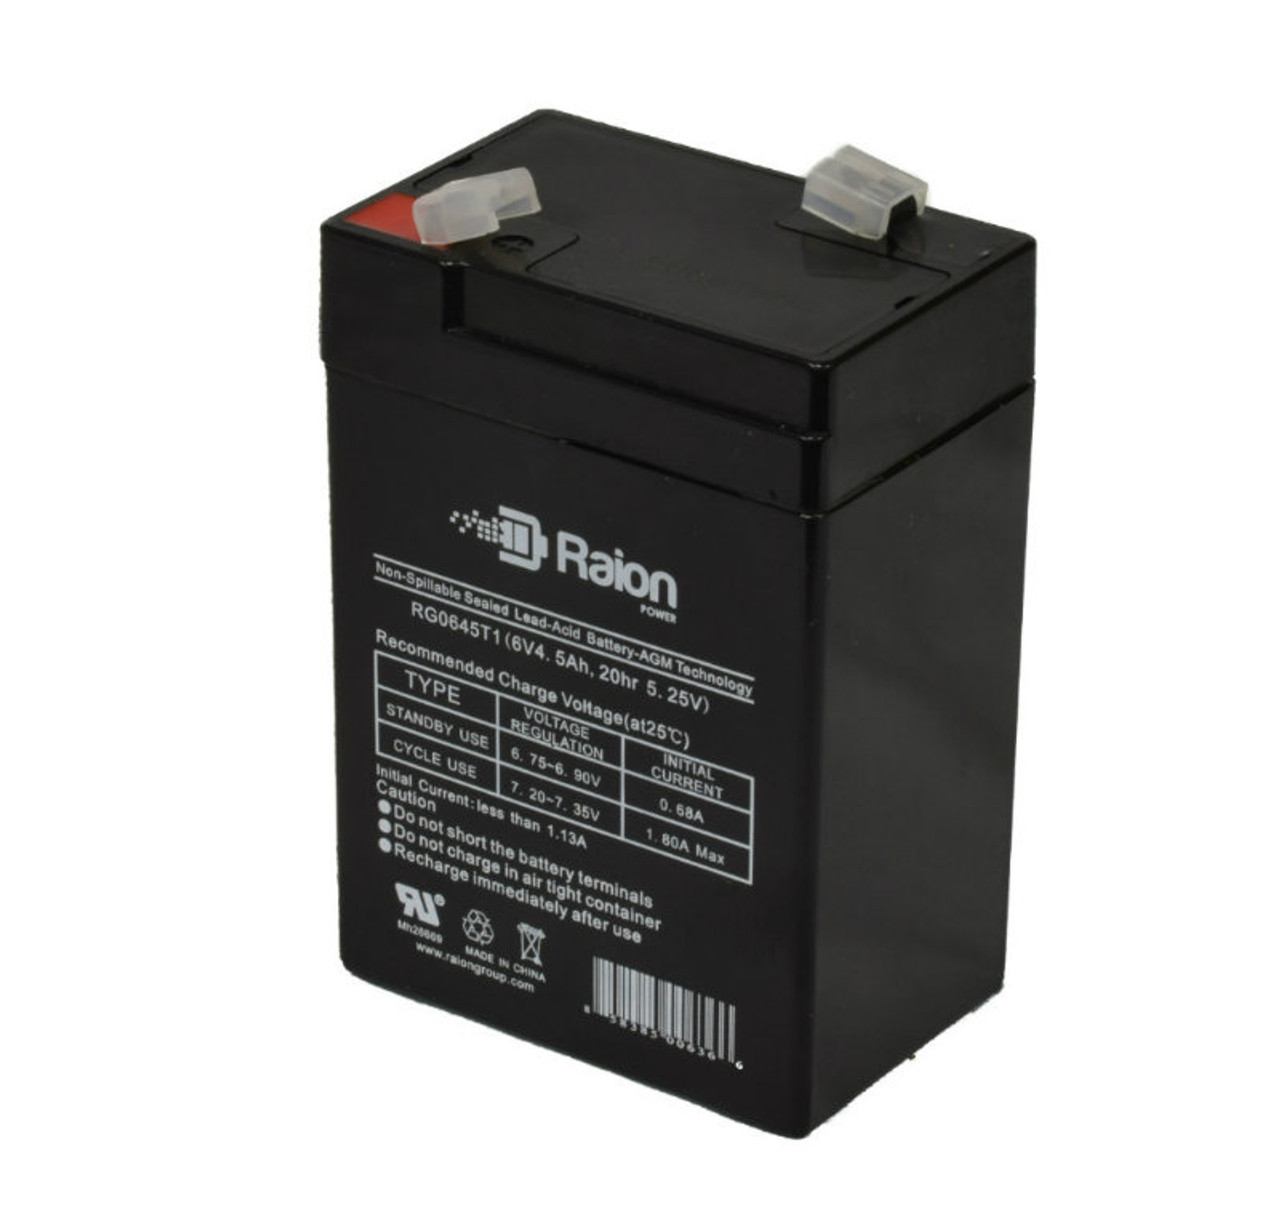 Raion Power RG0645T1 6V 4.5Ah Replacement Battery Cartridge for Expocell P206-50